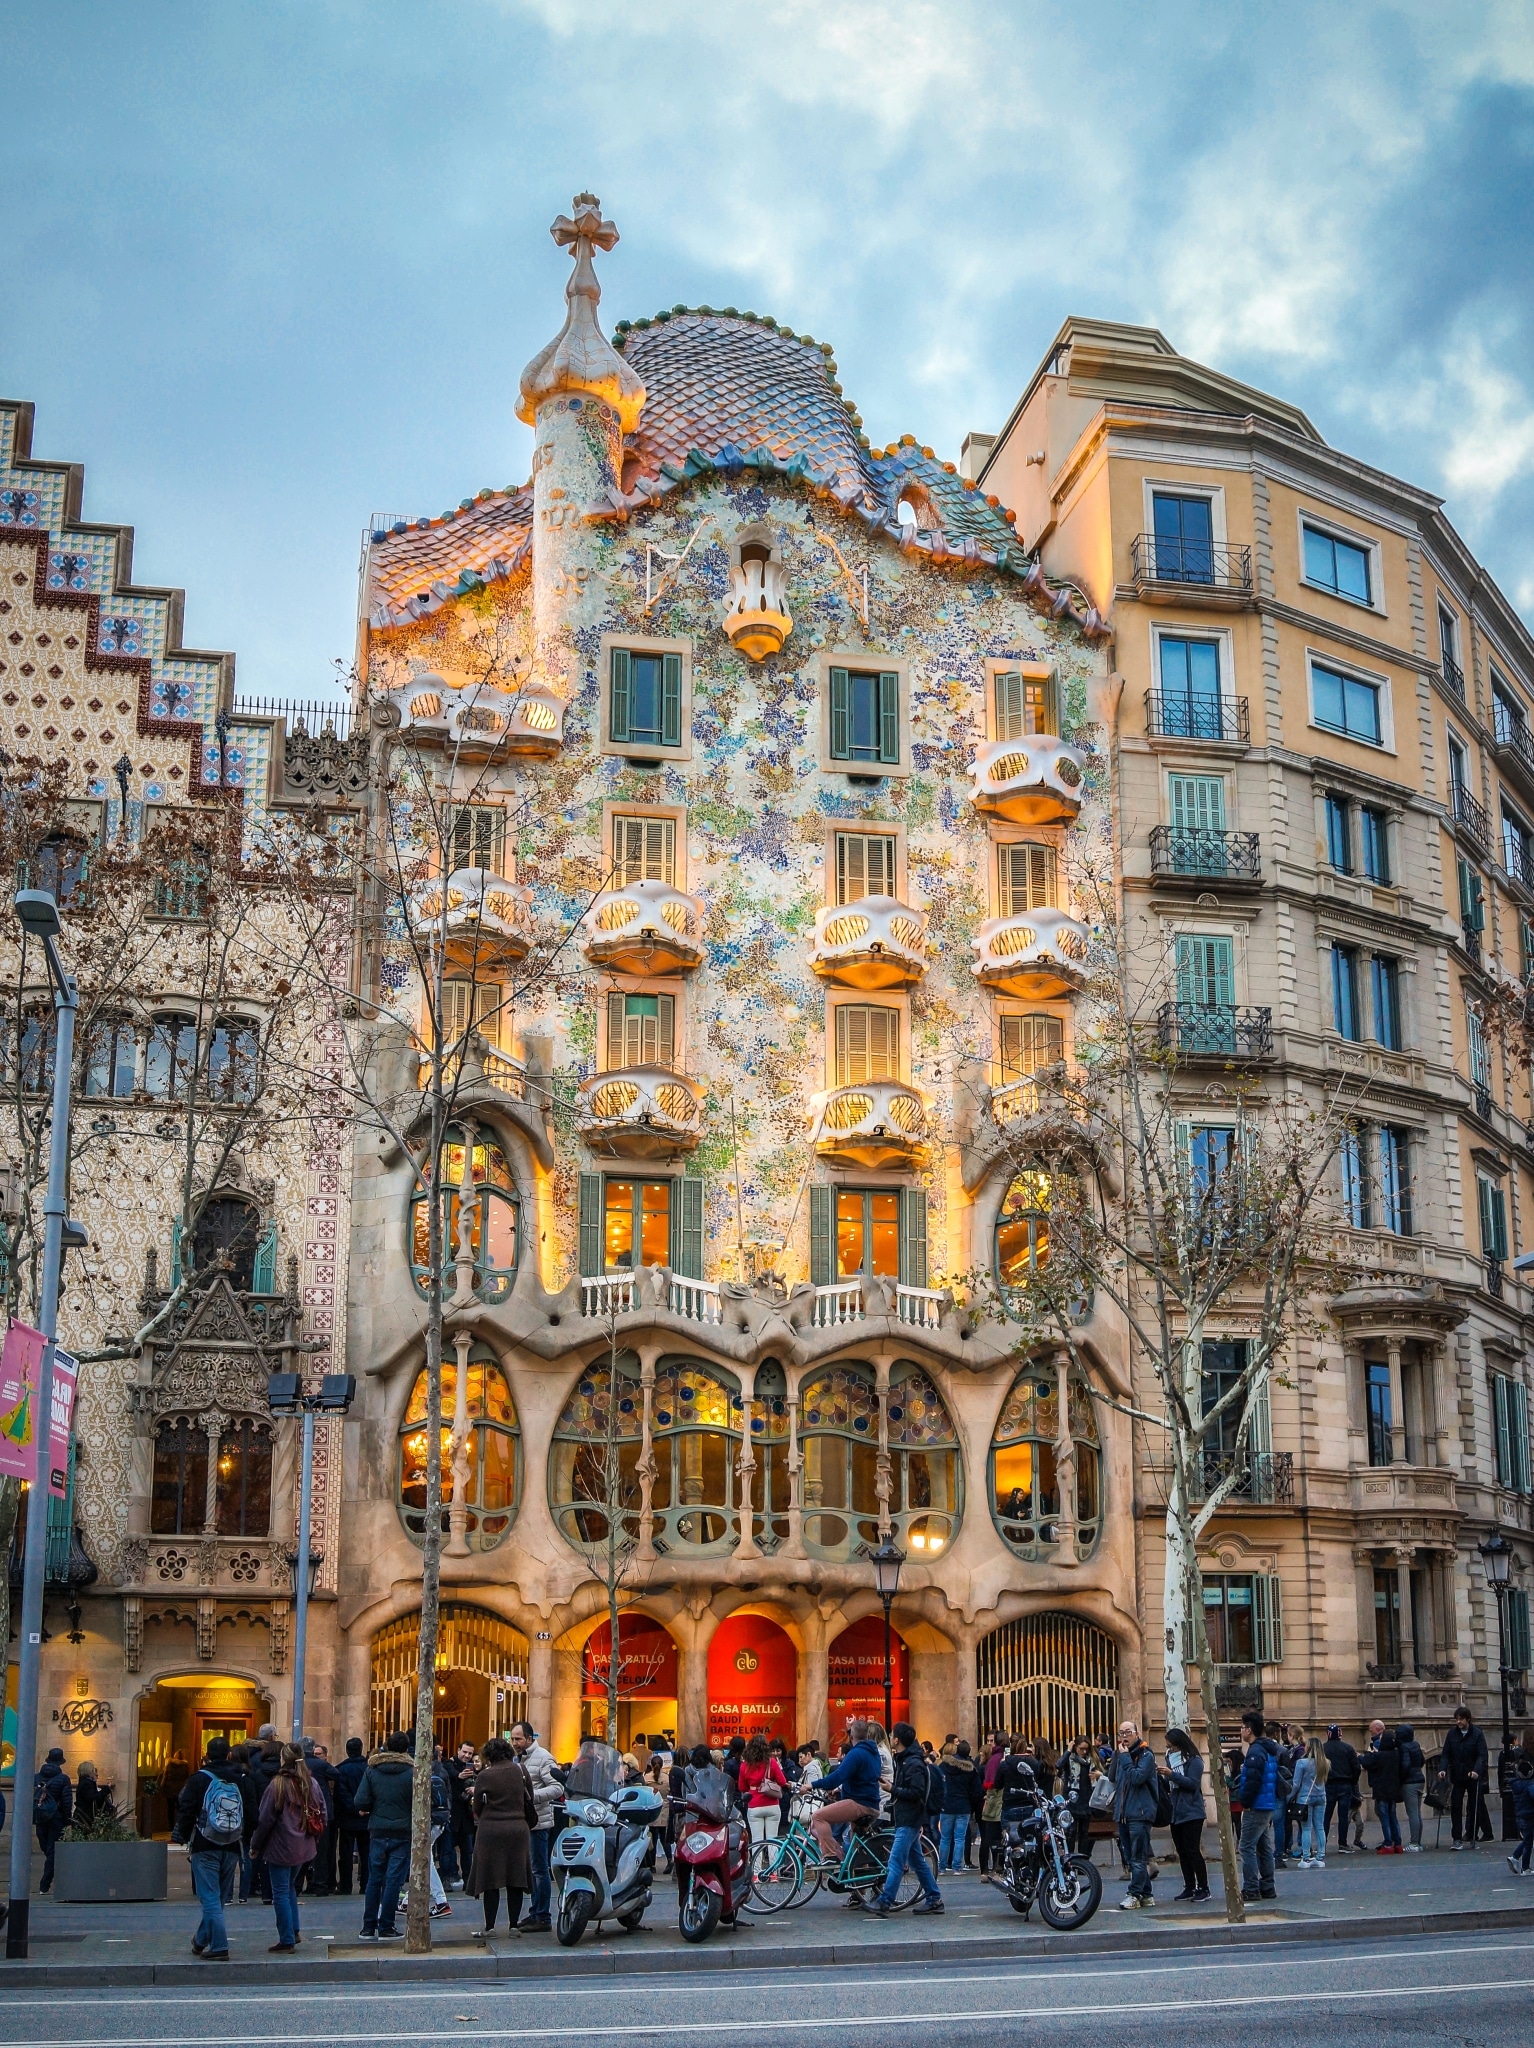 Discover the most magical buildings of Antoni Gaudí